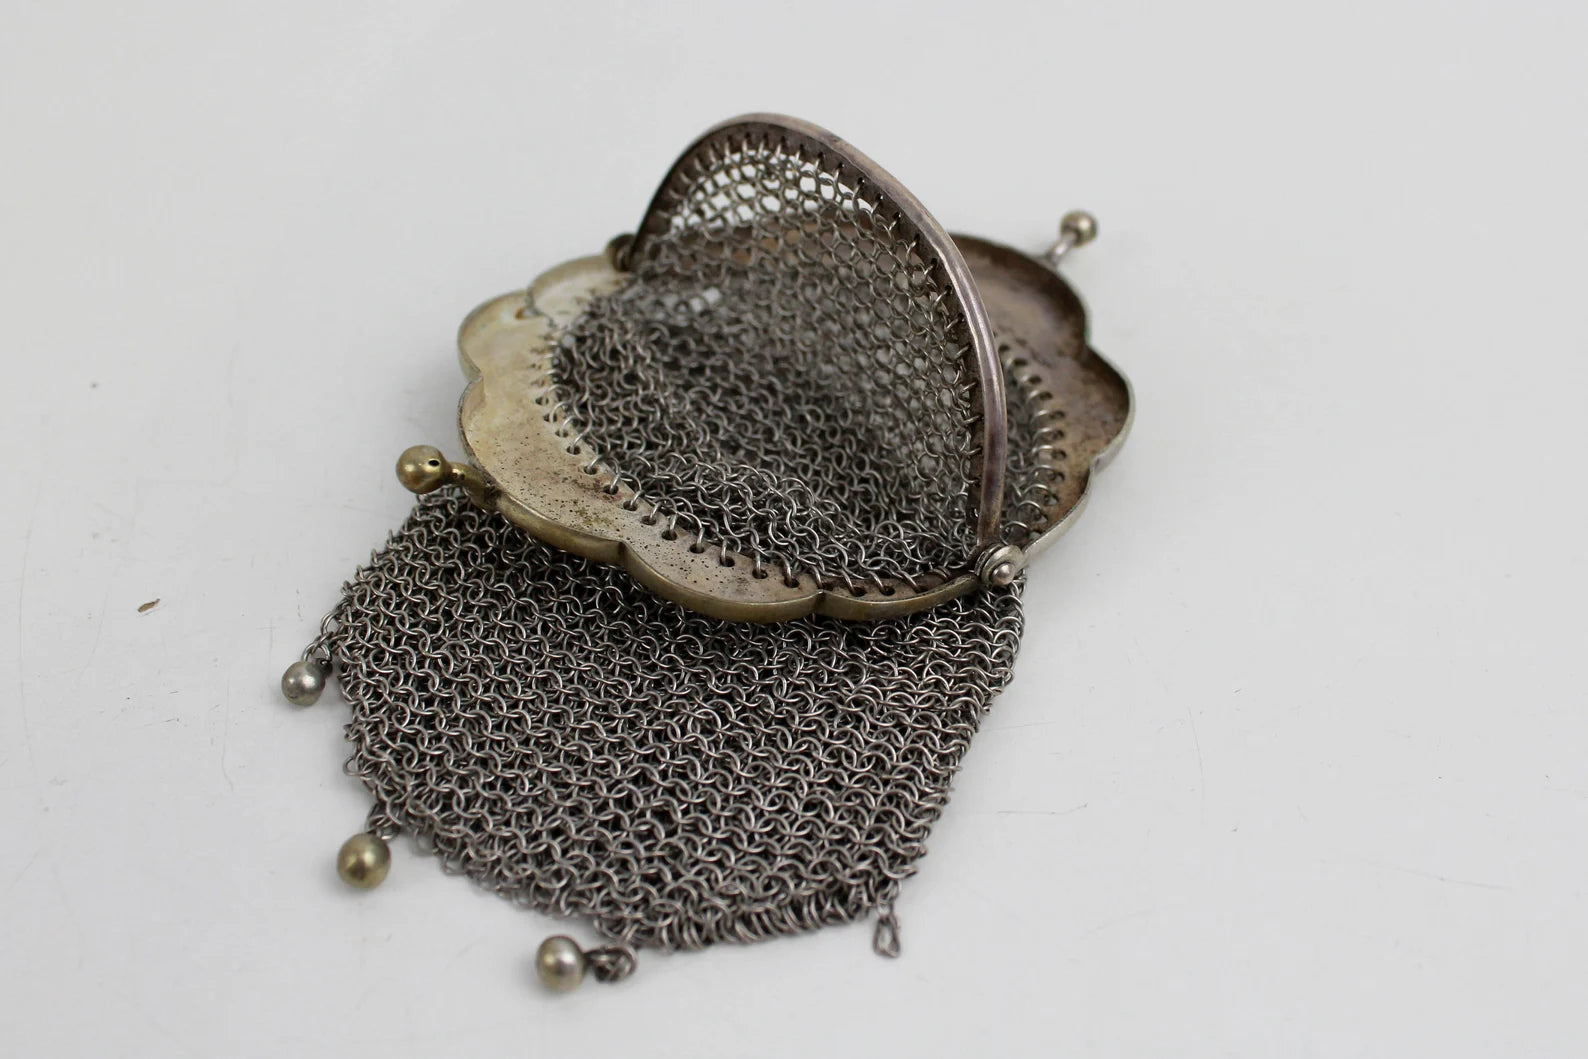 Vintage Coin Purse Pill Purse Miniature Mesh Chatelaine Clip Purse  Chainmaille Chain Mail a Gold With Pearls Vintage Accessory - Etsy |  Metallic purse, Vintage purses, Mesh purse